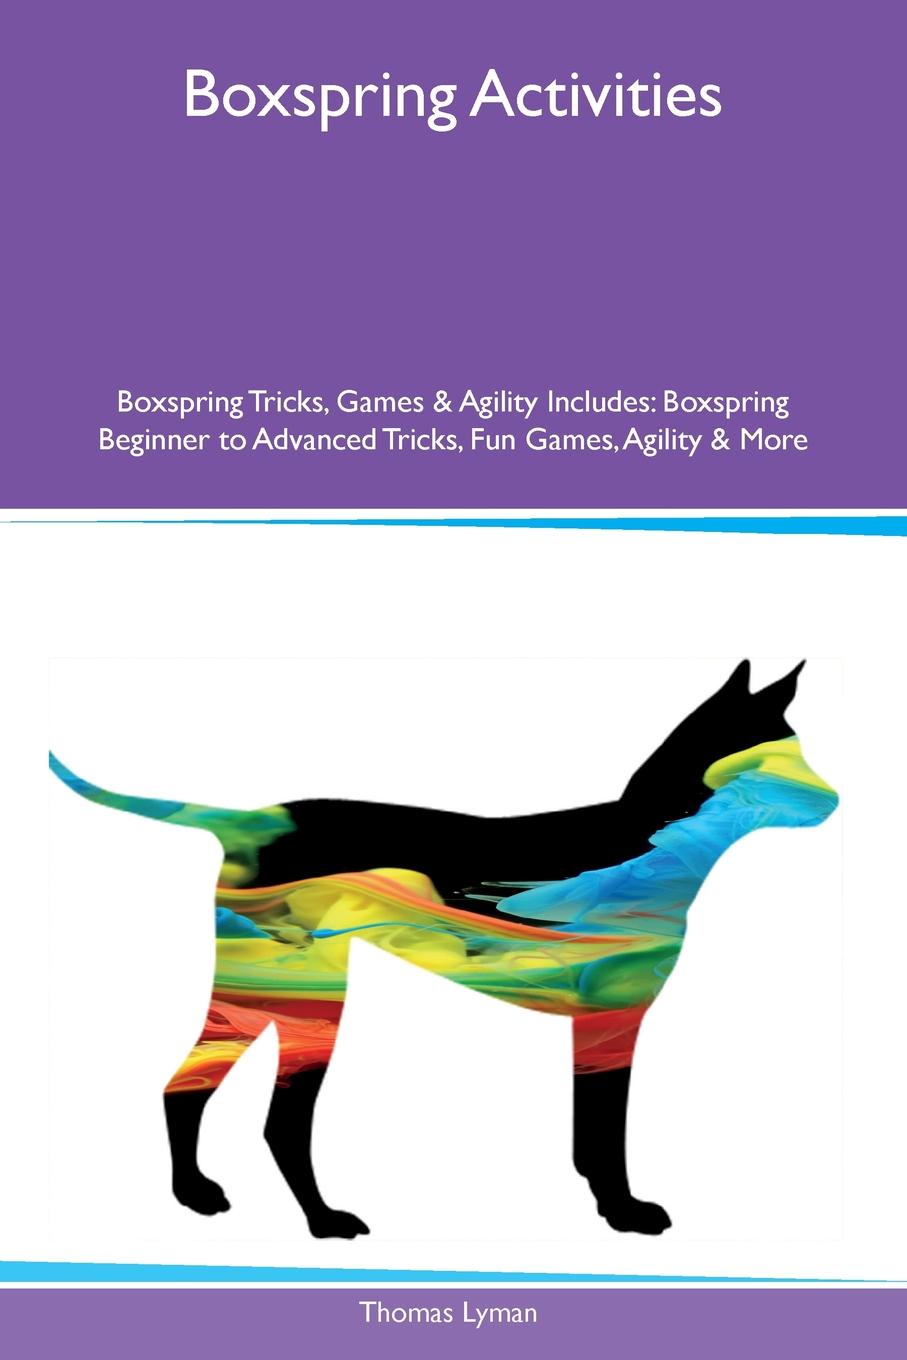 Boxspring Activities Boxspring Tricks, Games & Agility Includes. Boxspring Beginner to Advanced Tricks, Fun Games, Agility & More